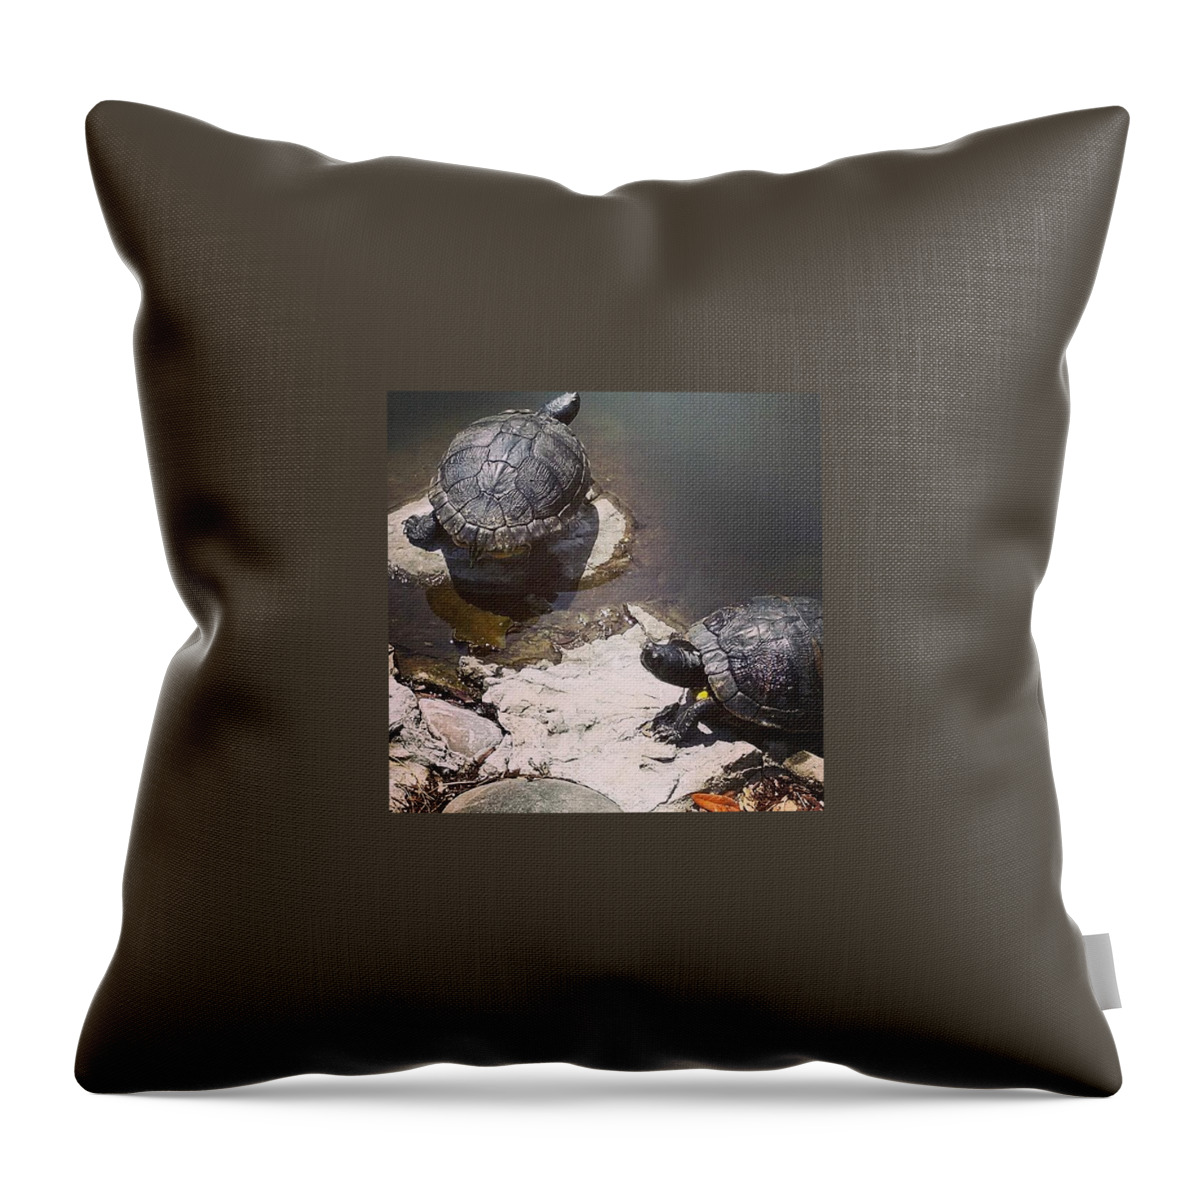 Turtle Throw Pillow featuring the photograph Turtles by Courtney Trivette